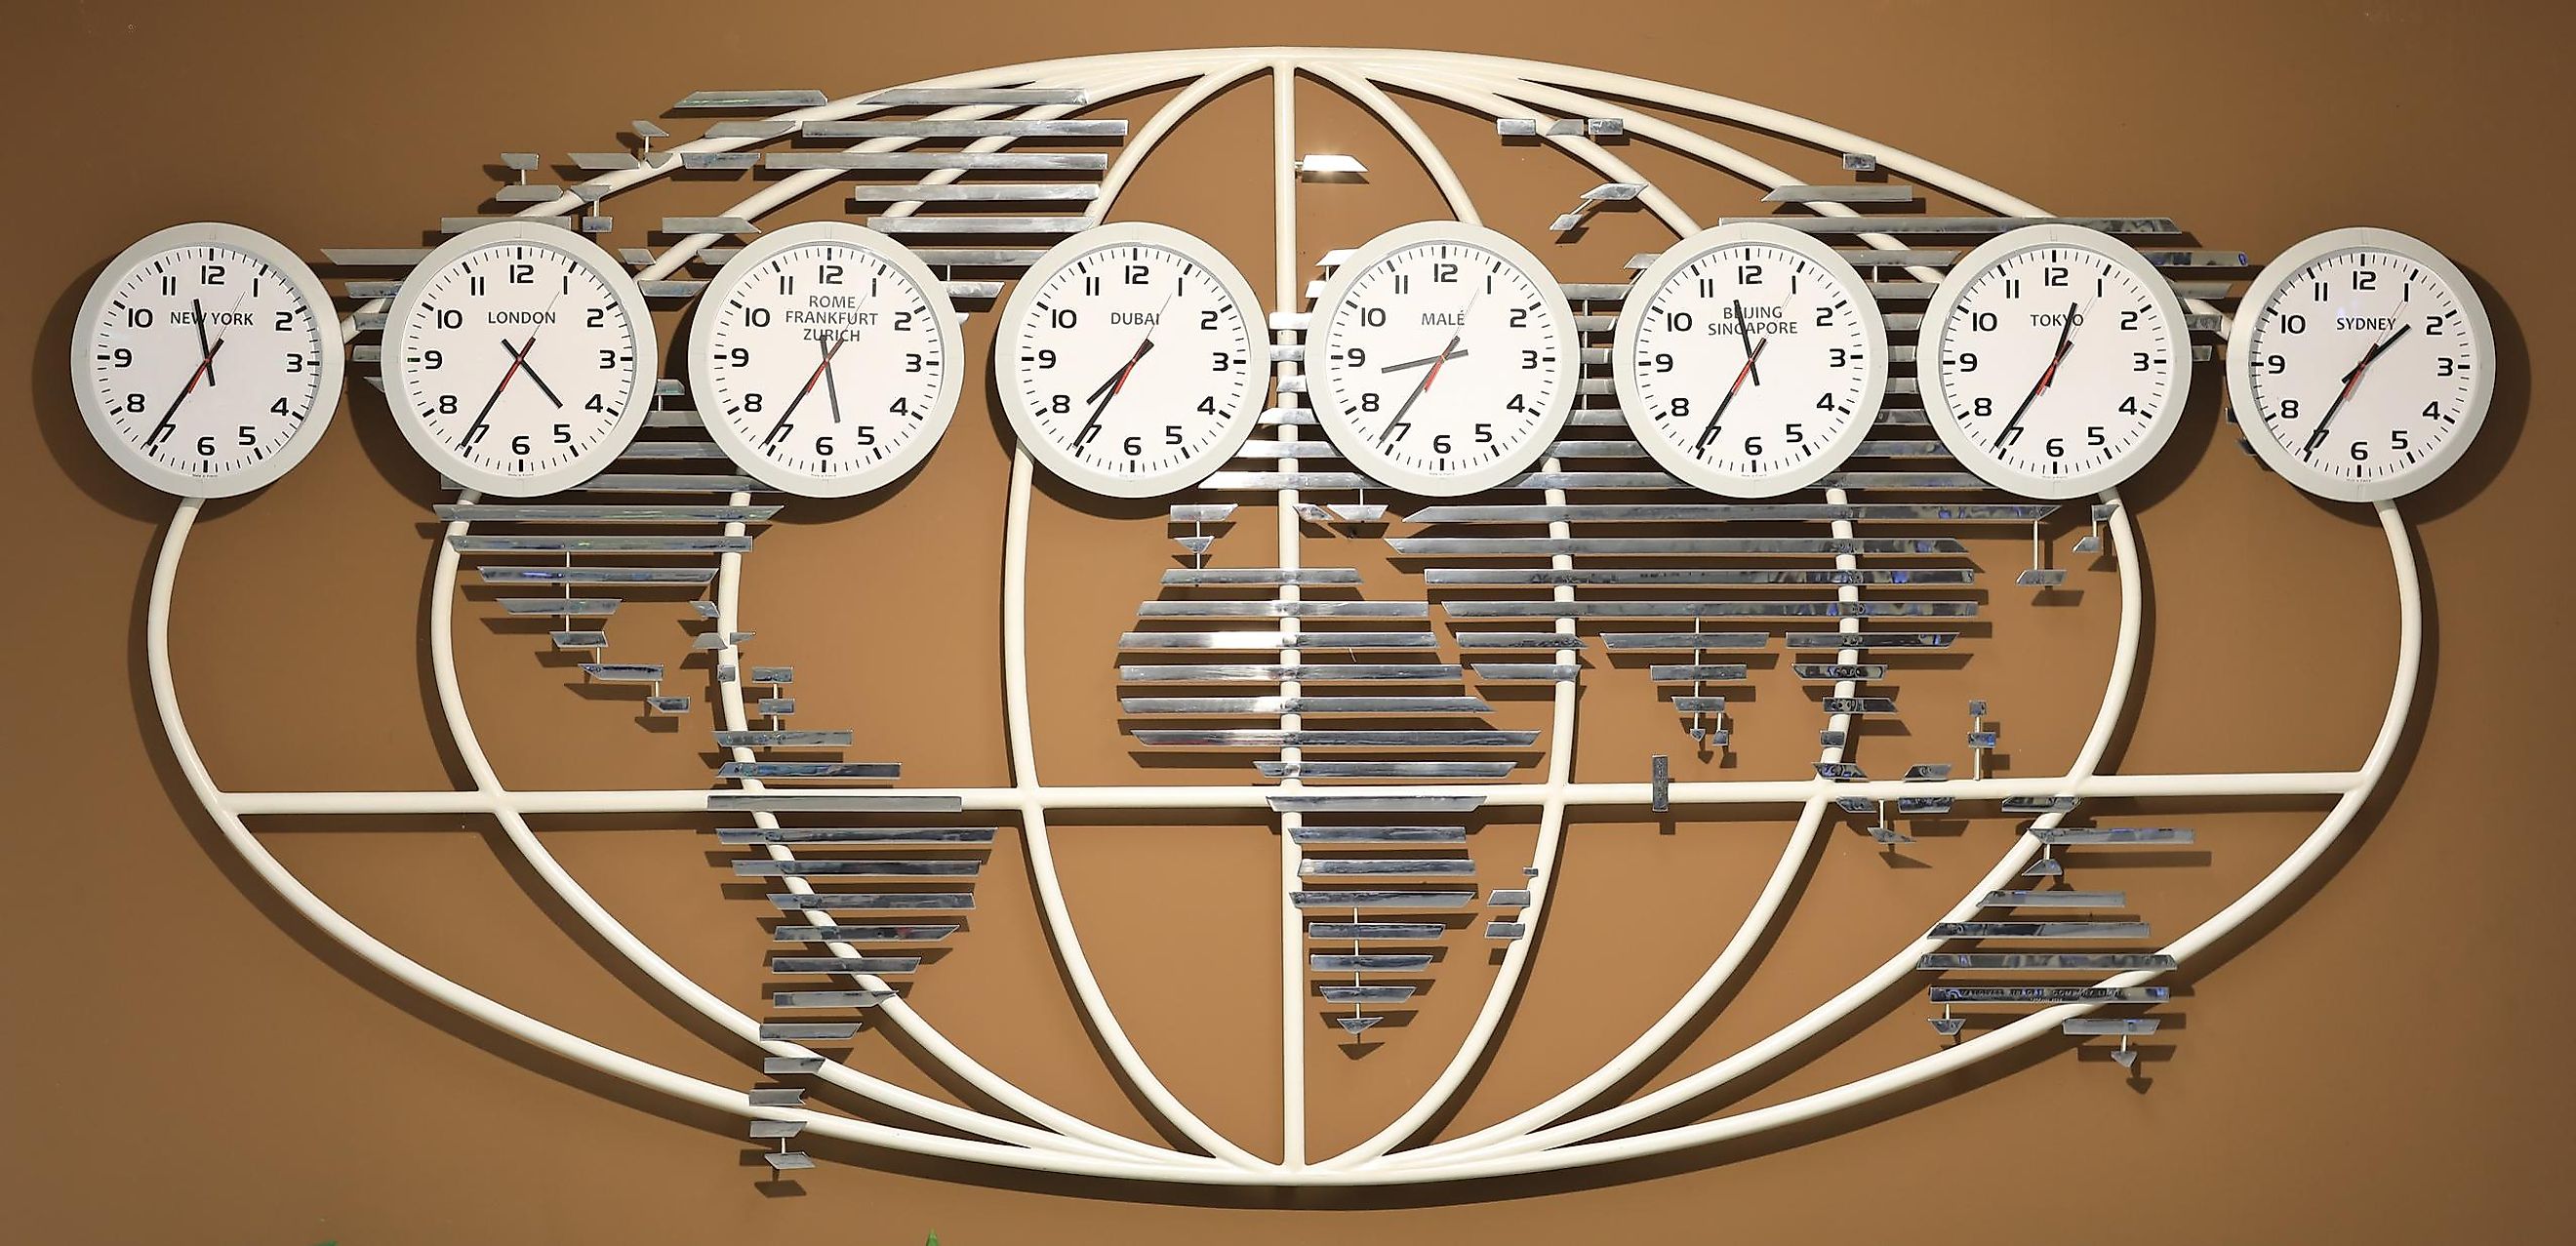 Comparison of US Daylight Savings Time & US Standard Time with Indian  Standard Time 